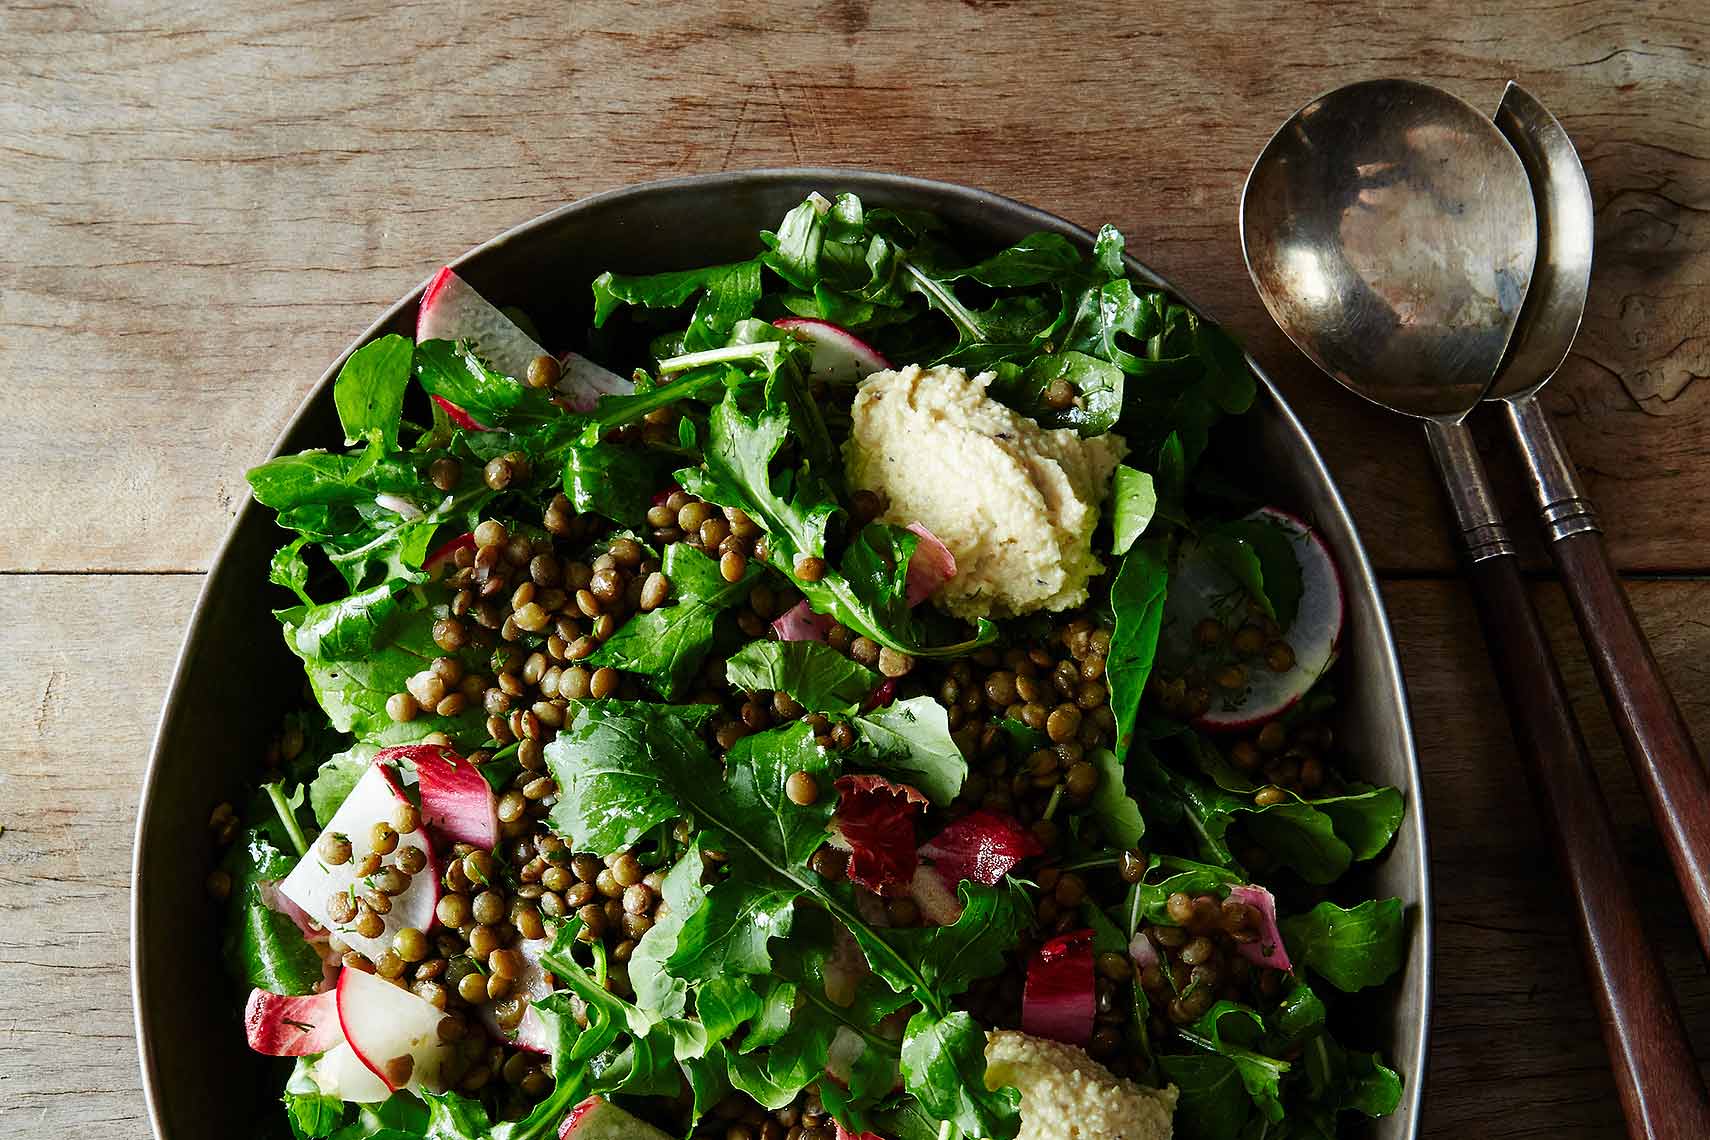 2014-1101_french-lentil-and-arugula-salad-with-herbed-cashew-cheese_horizontal_james-ransom_028